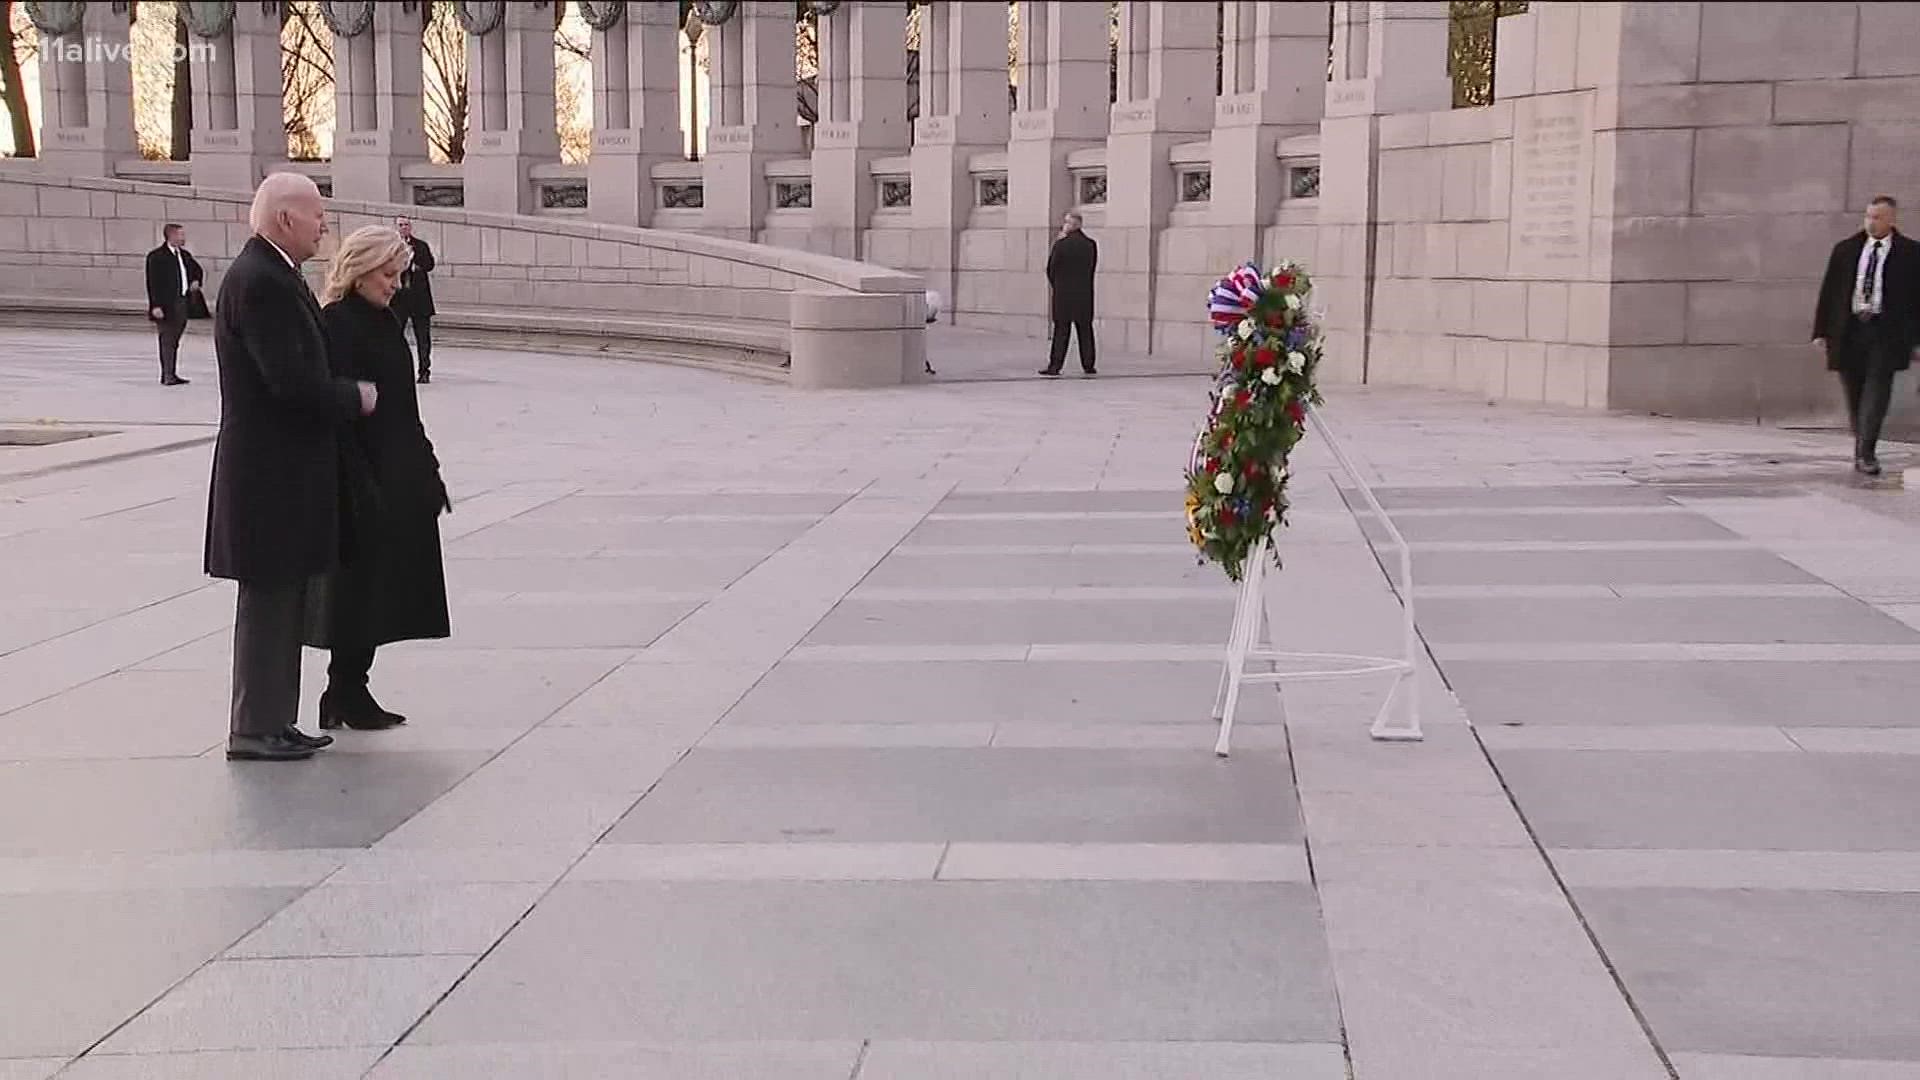 President Biden and the first lady visit WW2 memorial in the nation's capital to pay tribute to veterans on 80th anniversary of Pearl Harbor.